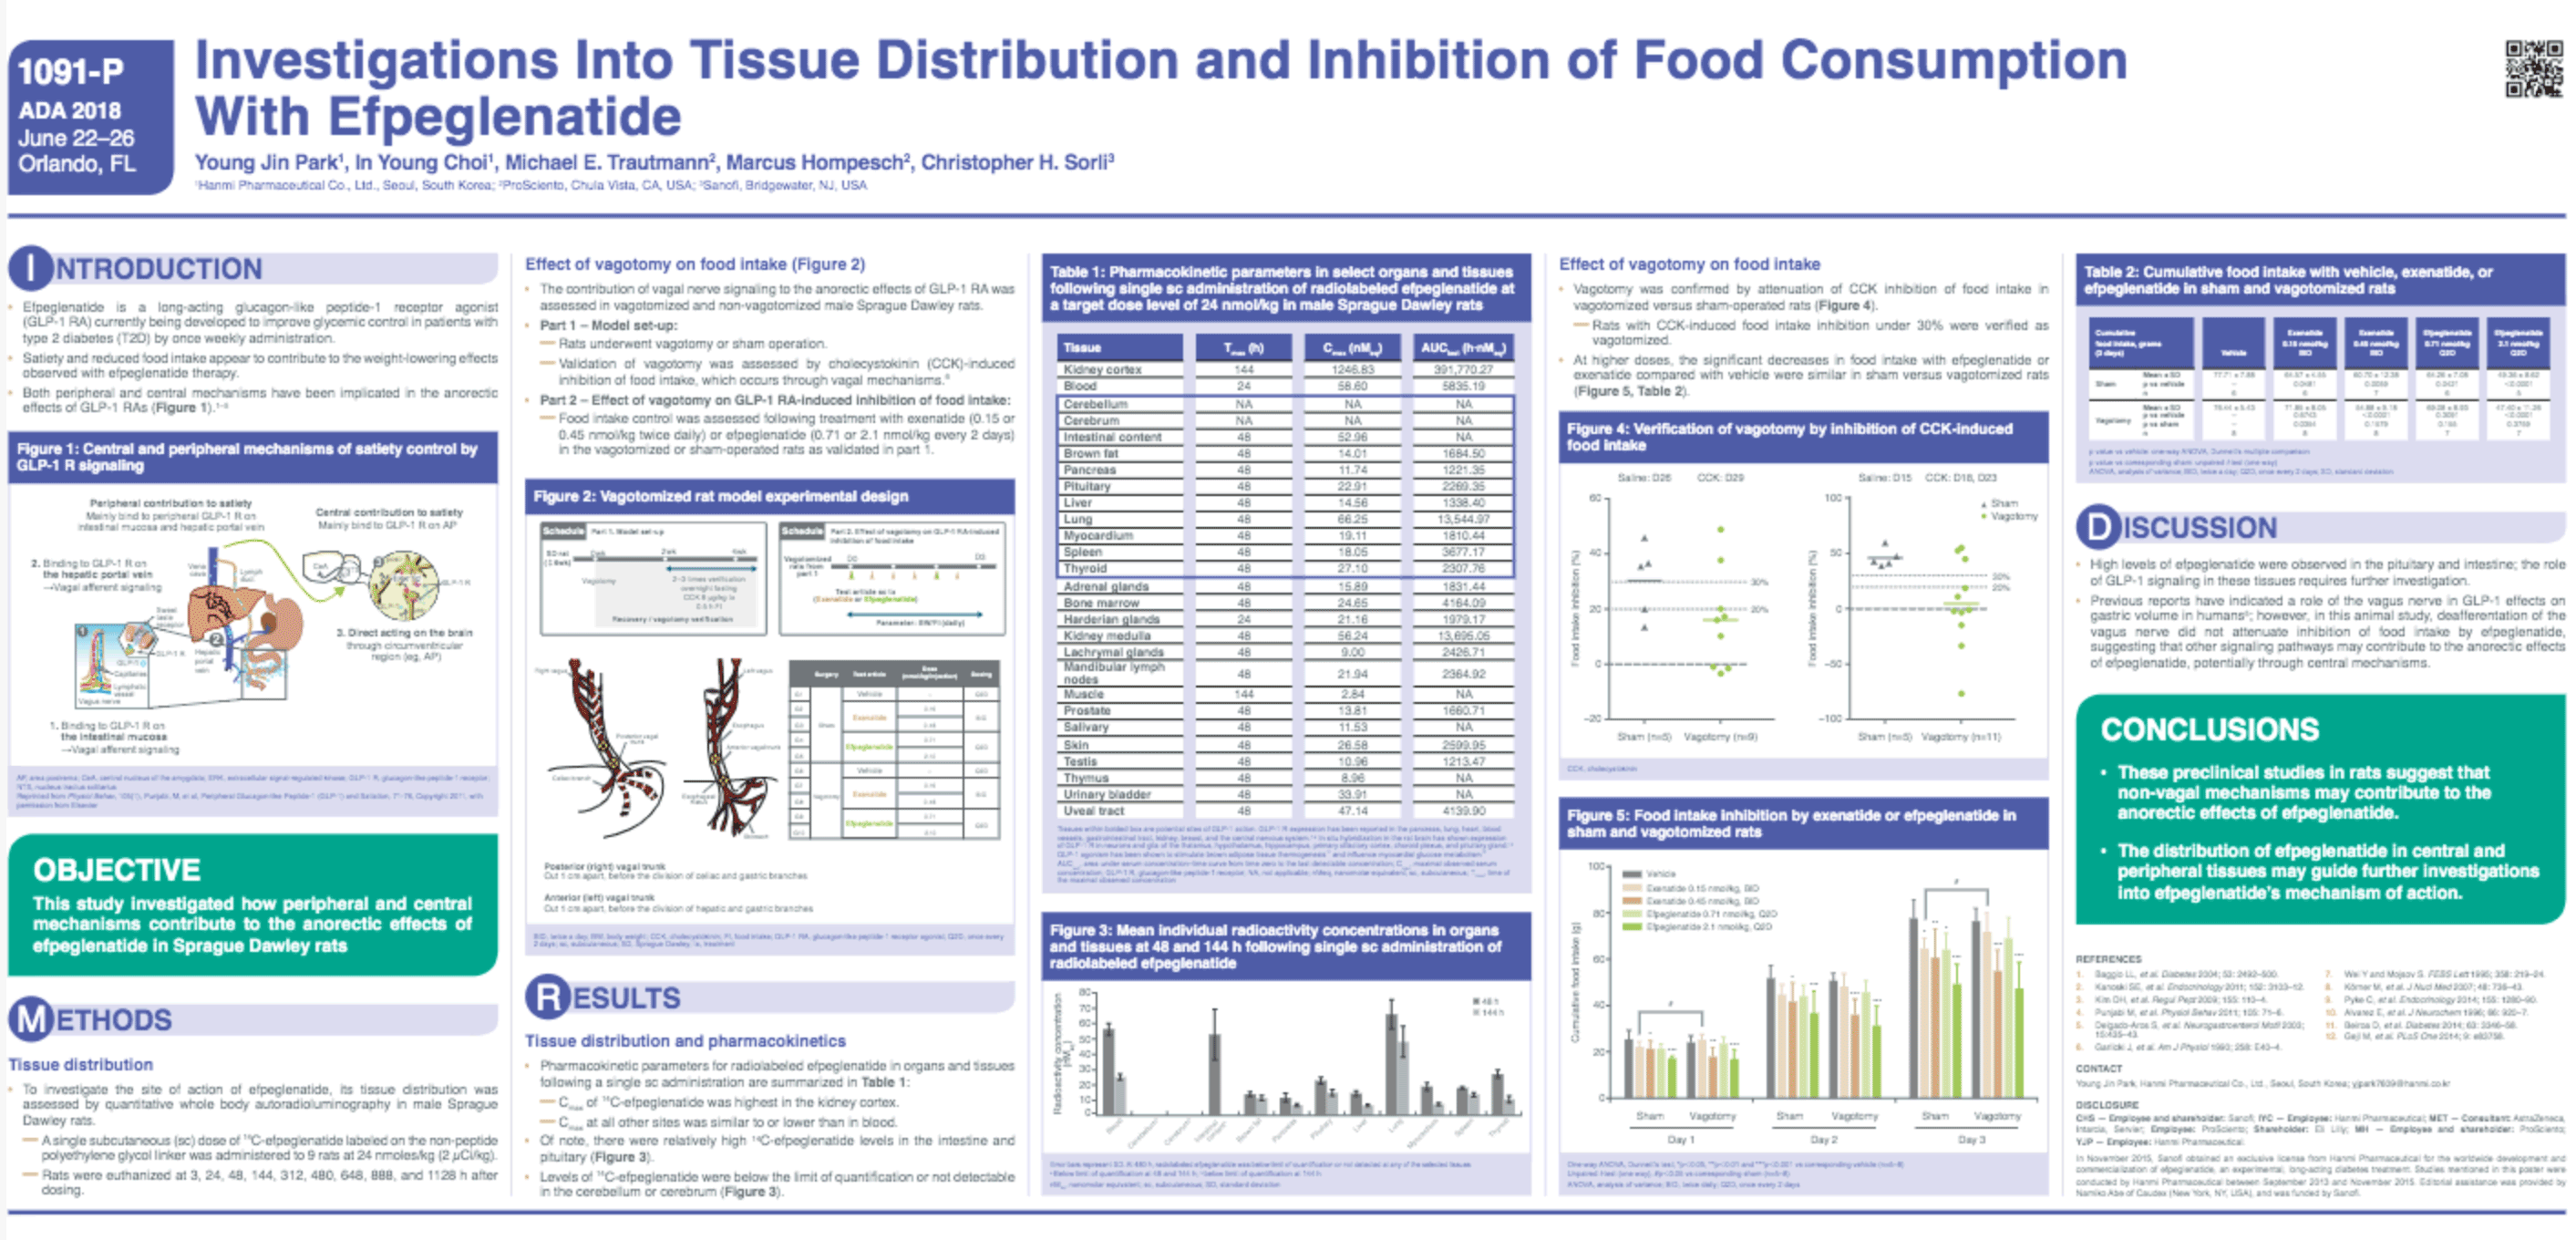 image of Investigations into Tissue Distribution and Inhibition of Food Consumption with Efpeglenatide